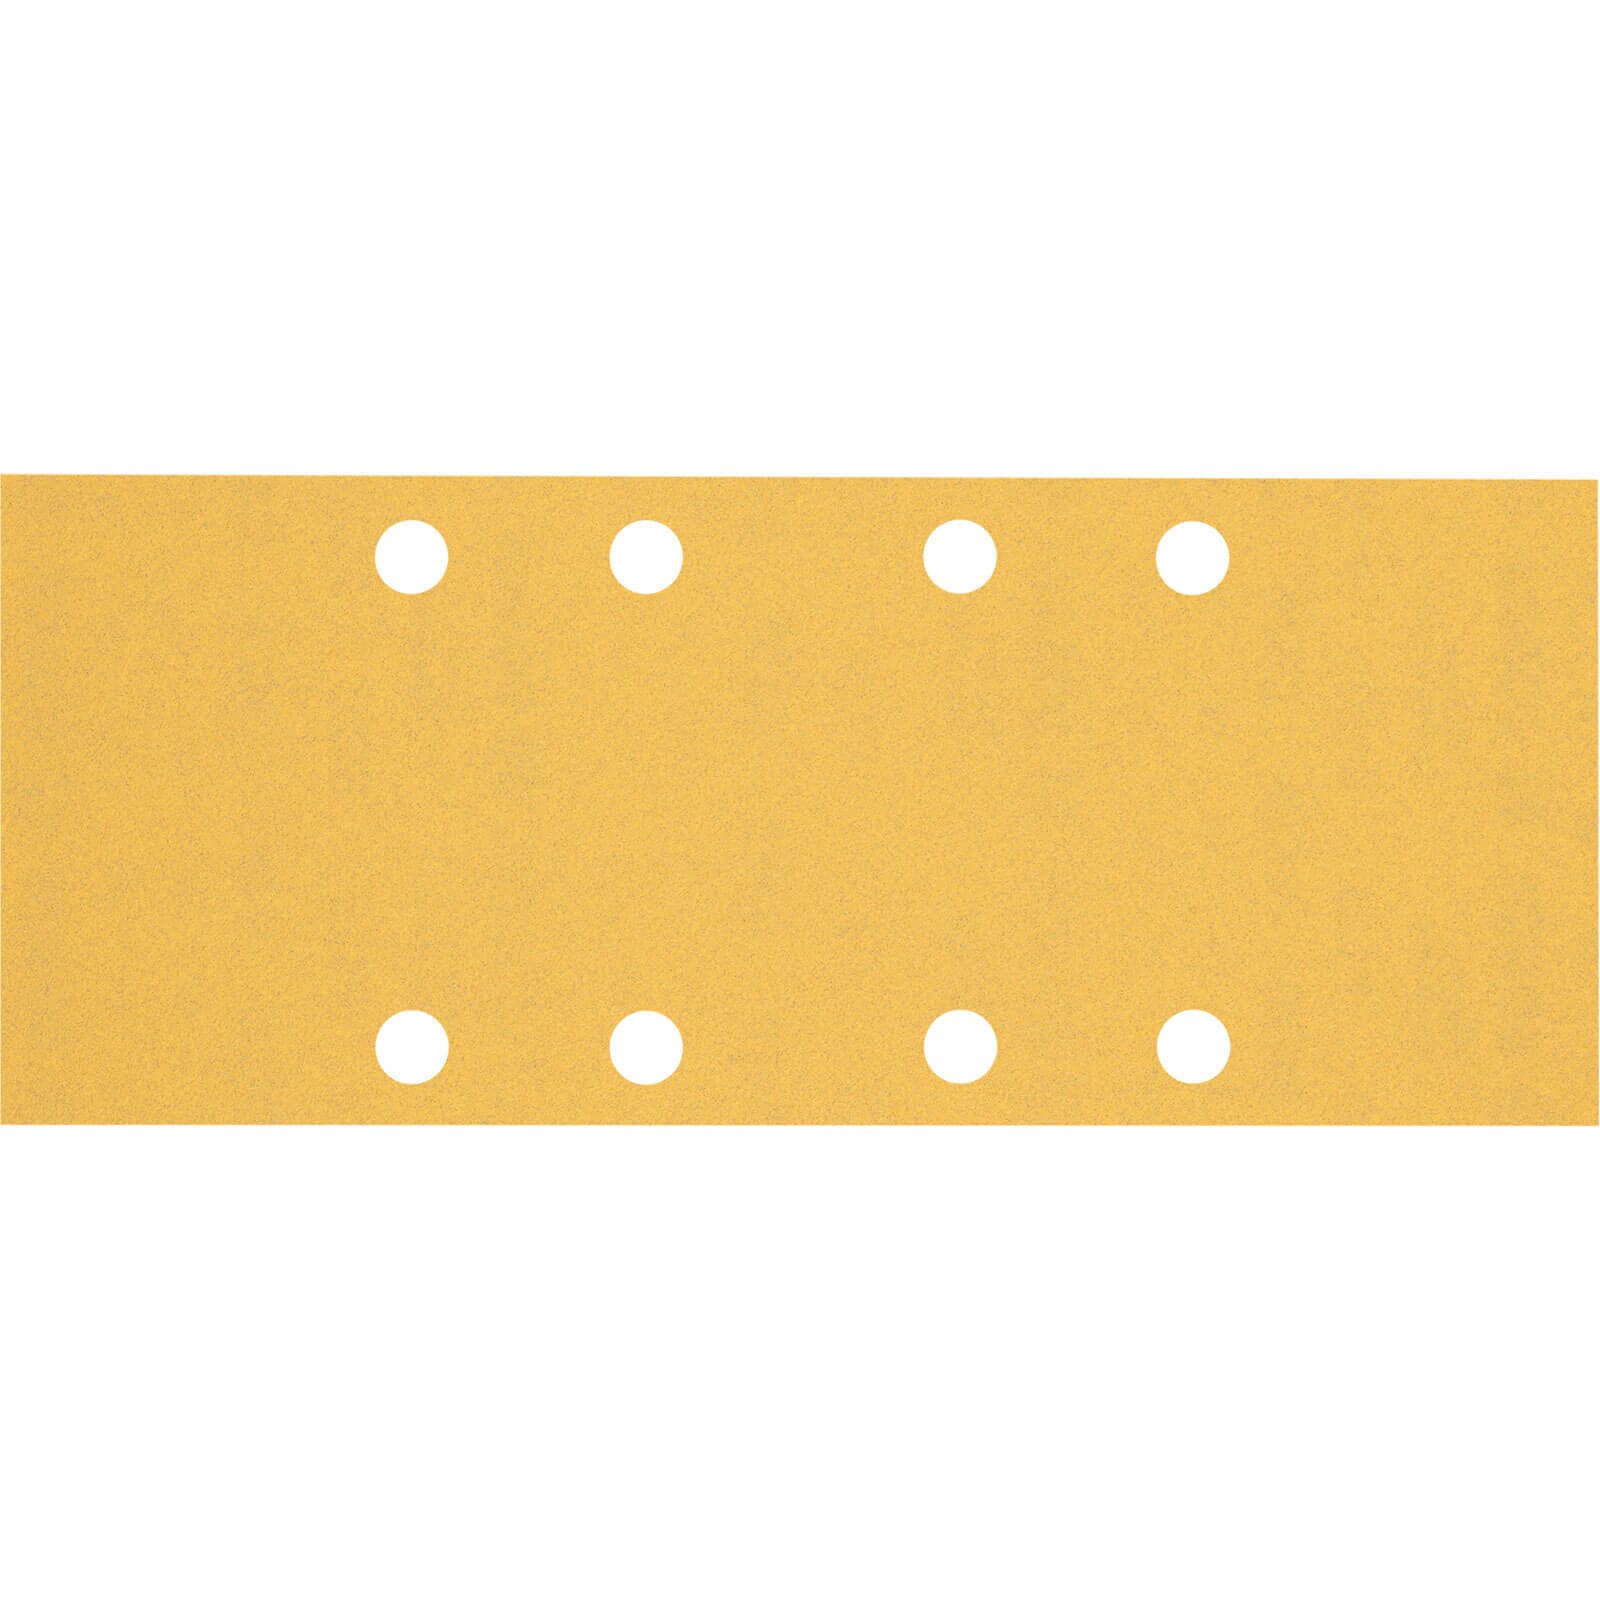 Image of Bosch Expert C470 Best for Wood and Paint Sanding Sheets 93mm x 230mm 120g Pack of 10